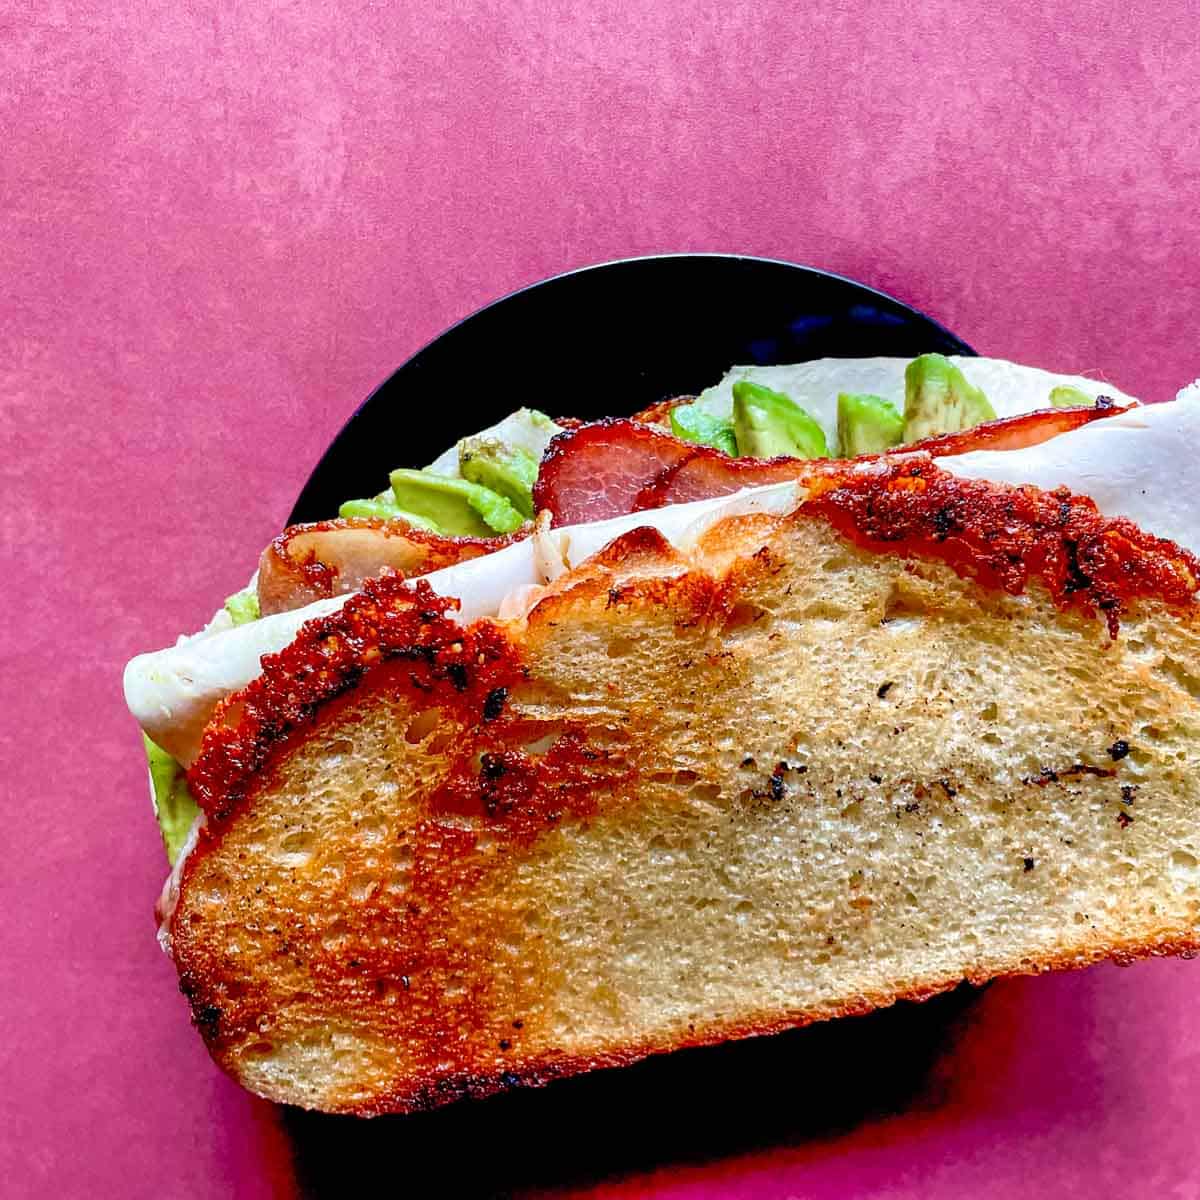 The toasted turkey avocado sandwich is shown from above on a red background.